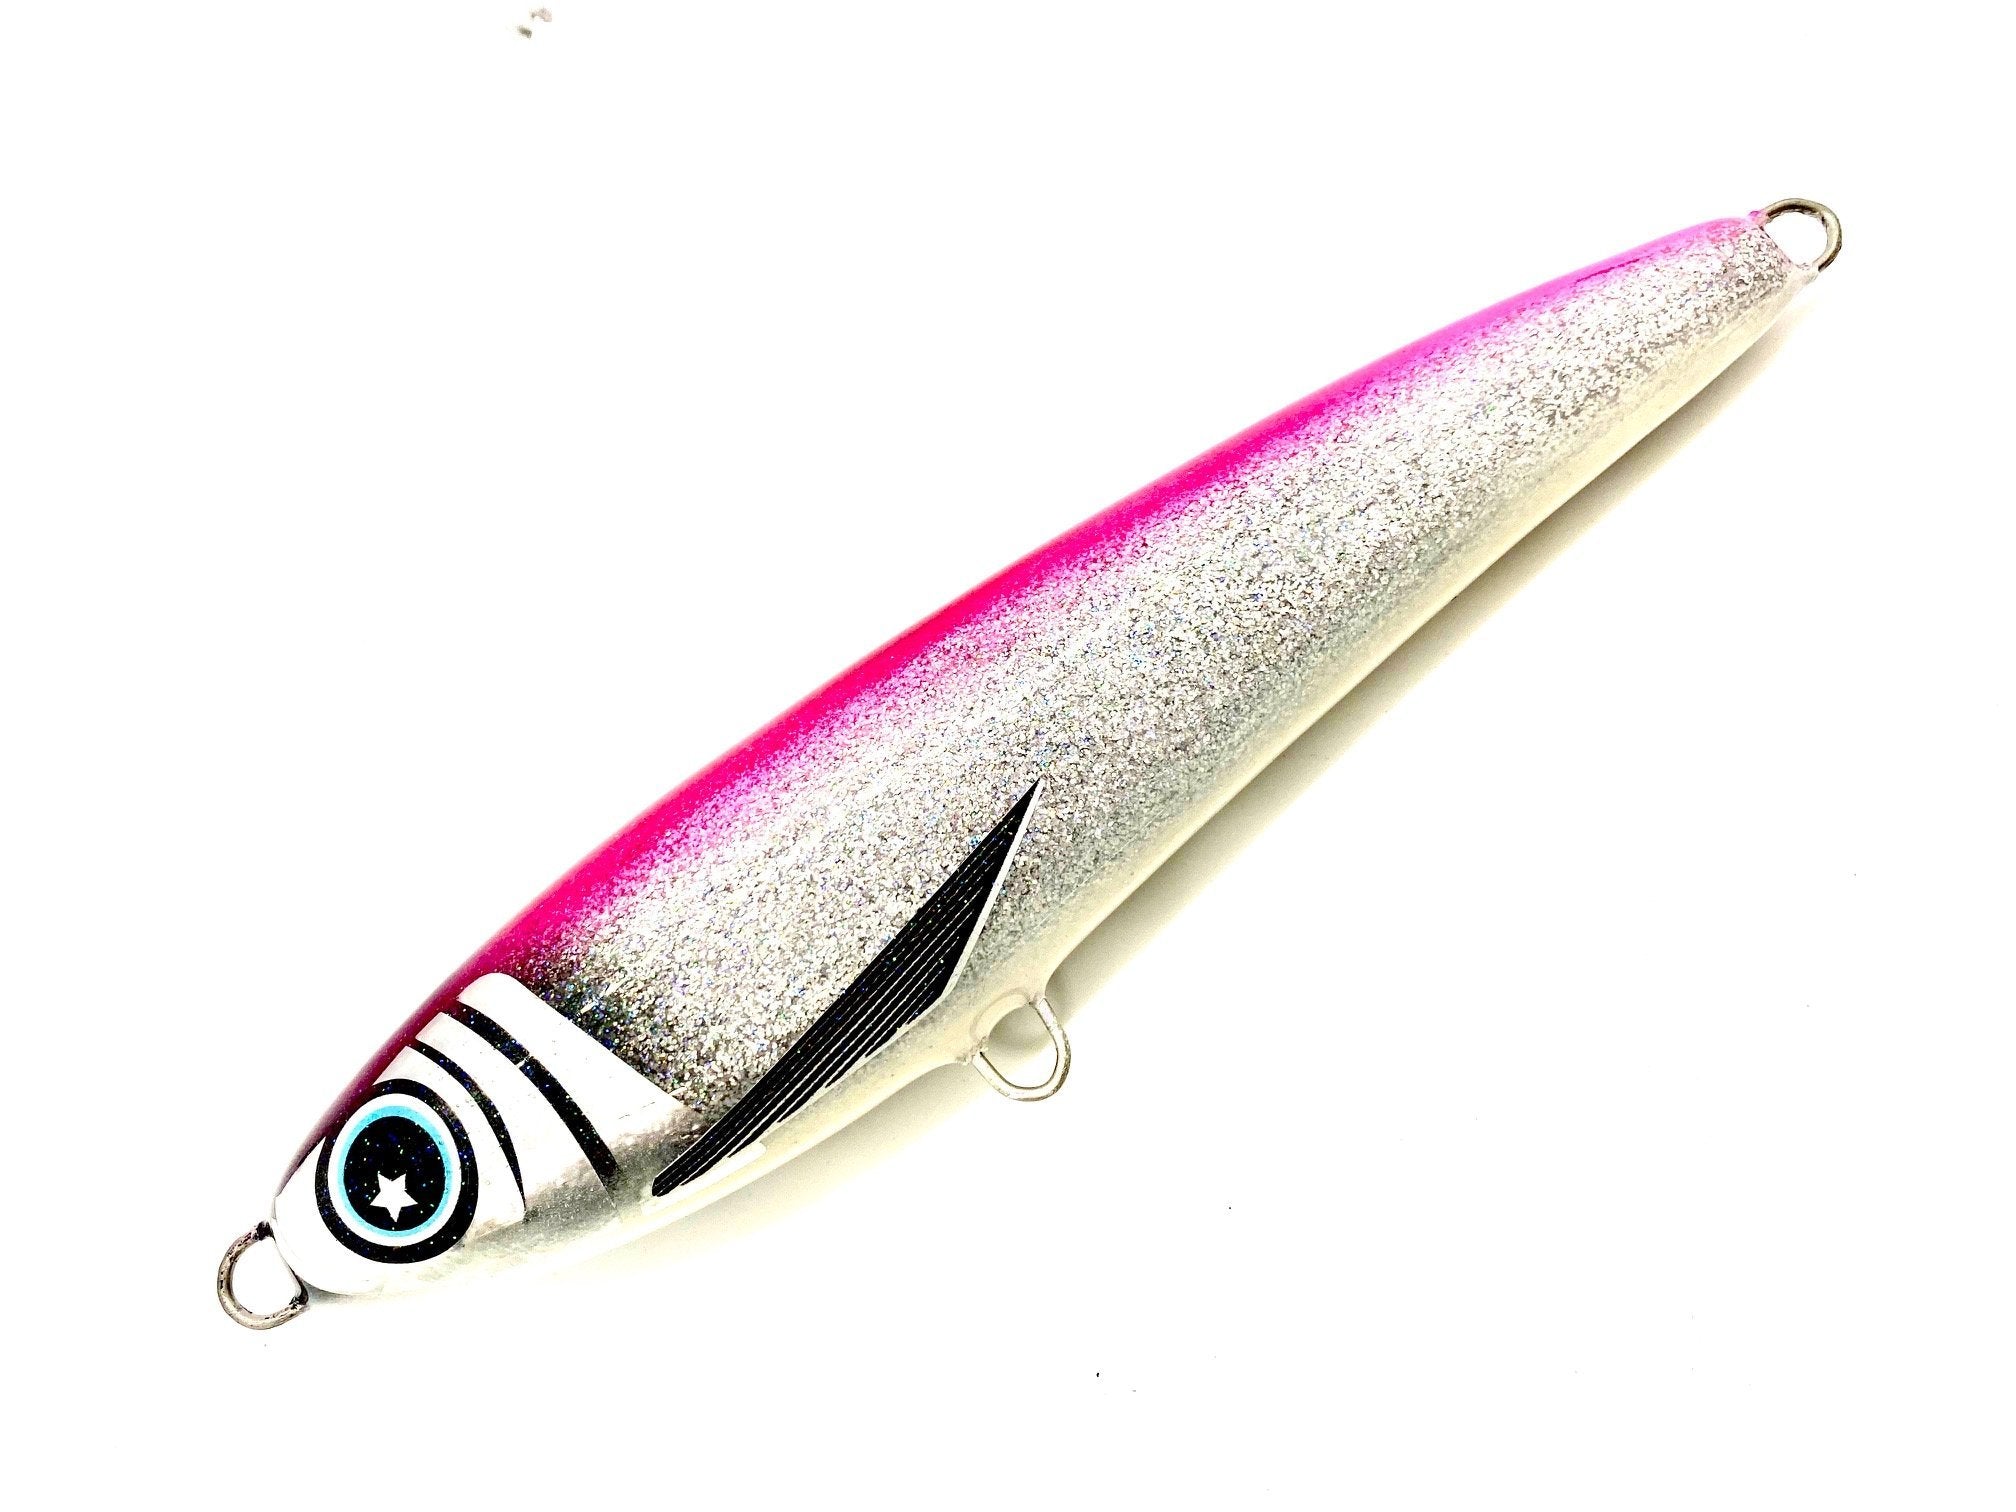 Herring Lureshunthouse 130mm 32g Topwater Pencil Lure With Rattle -  Versatile Bass & Zander Bait